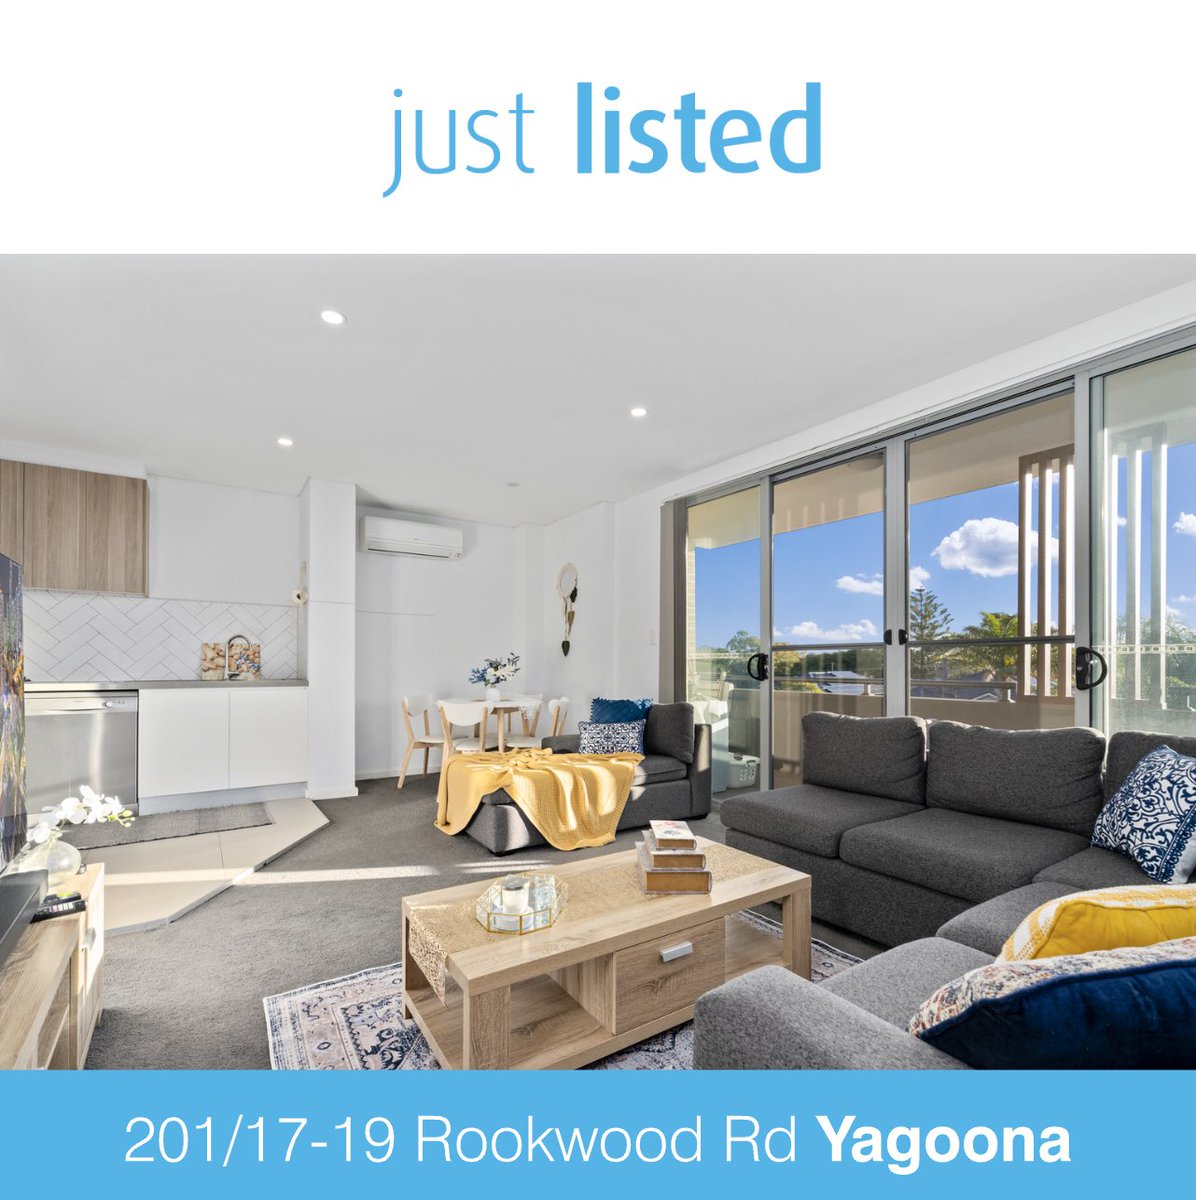 Just listed:

201/17-19 Rookwood Road Yagoona!

Call to inspect on 0410965709

#starrpartnersauburn #realestate #property #forsale #auction #newlisting #newtothemarket #justlisted #opportunity #yagoona